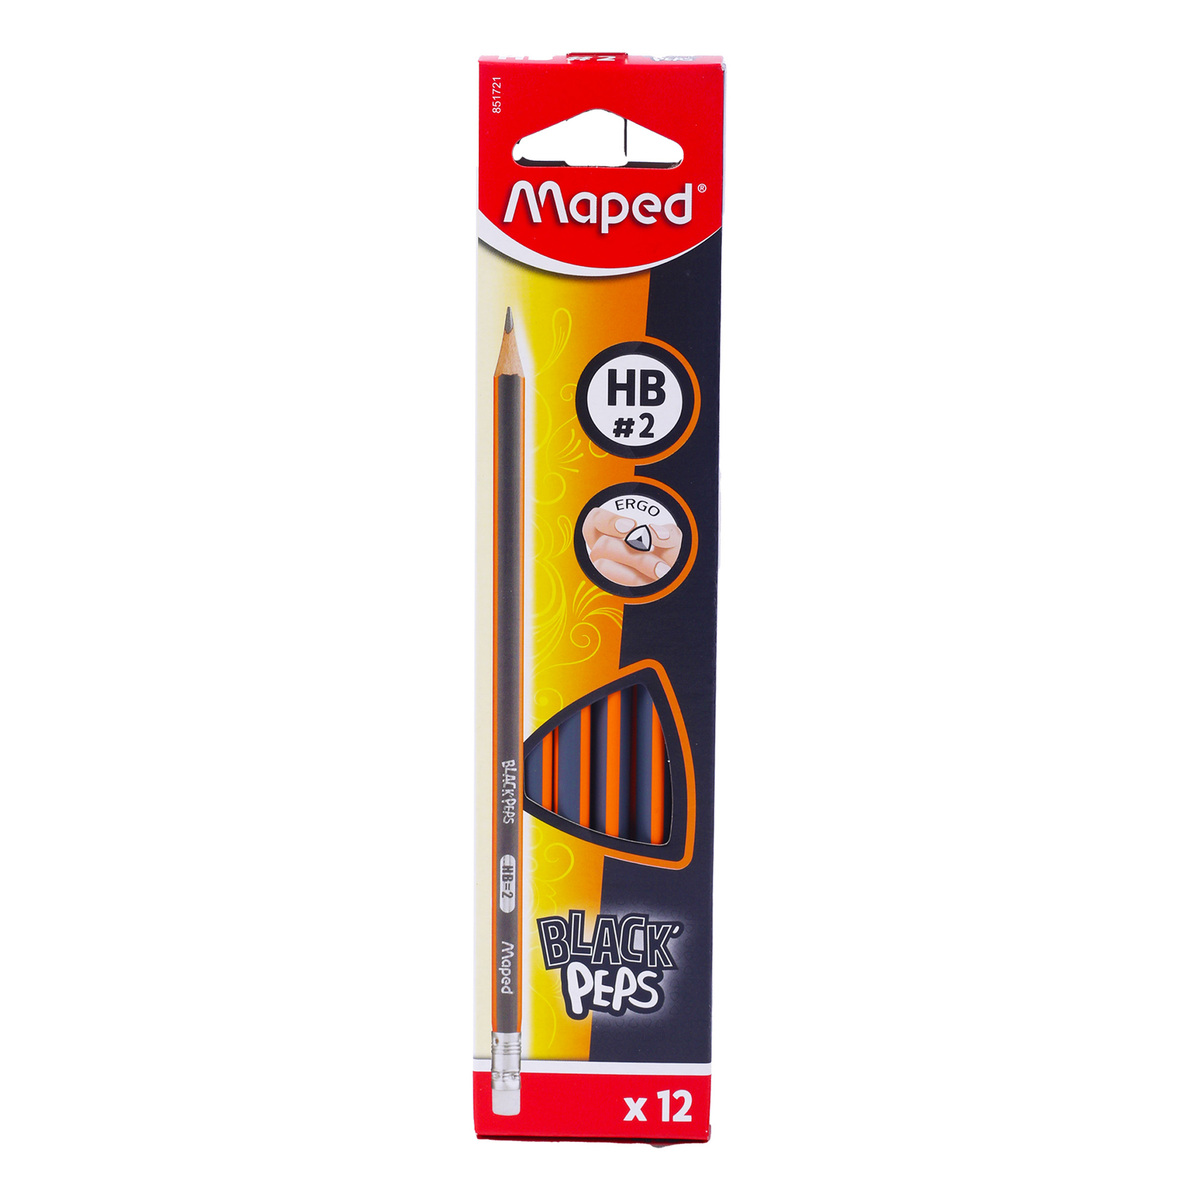 Maped HB Pencil With Eraser 12 pcs